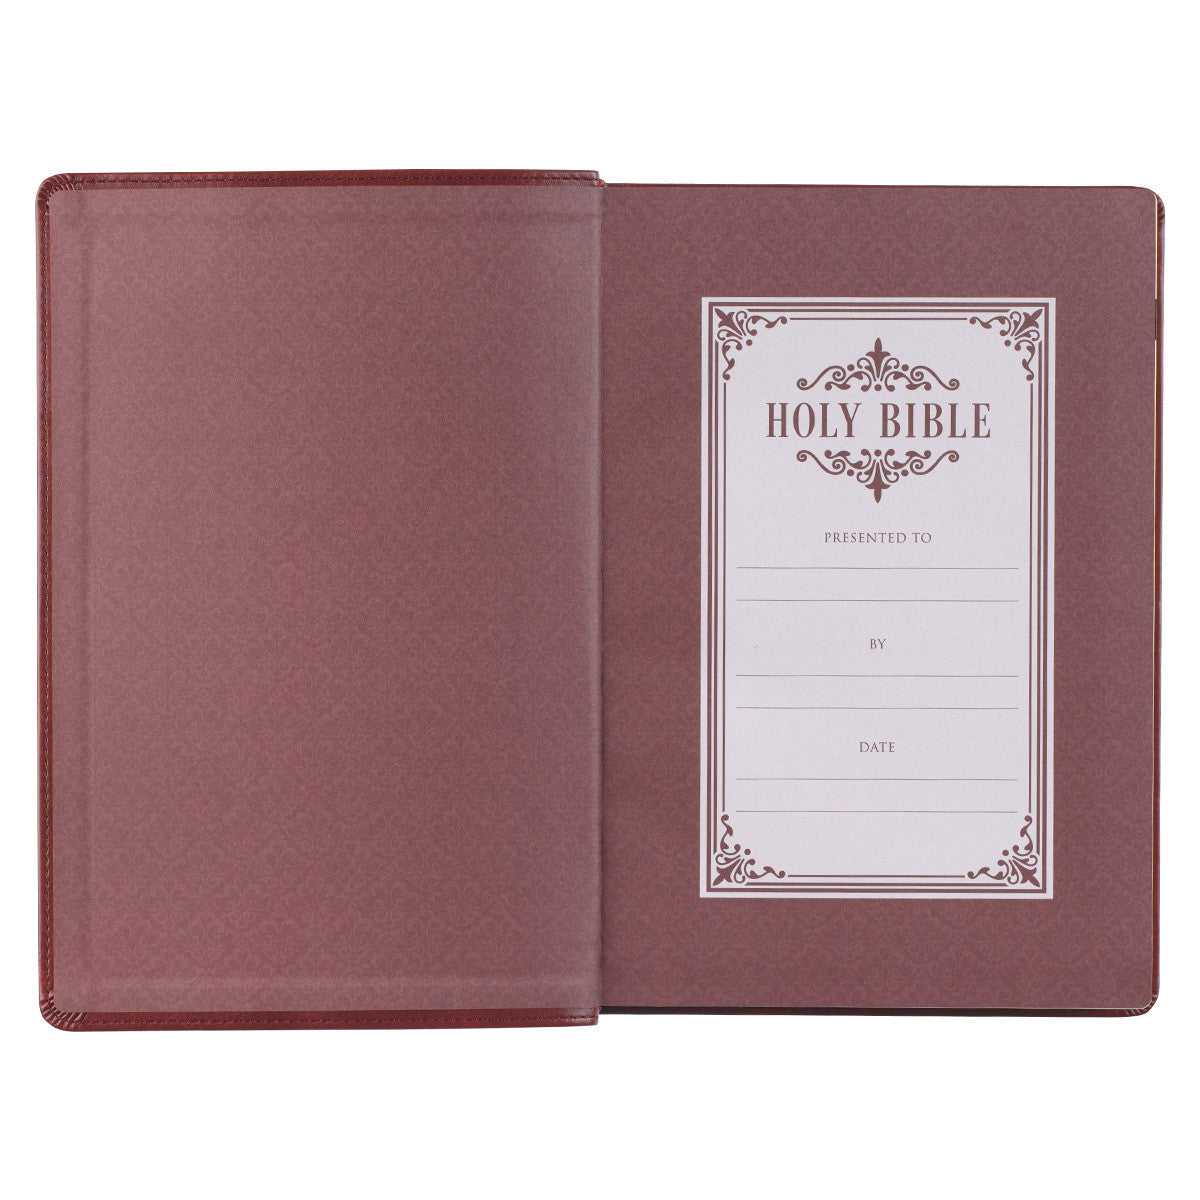 Burgundy Faux Leather Full-size Giant Print King James Version Bible with Thumb Index